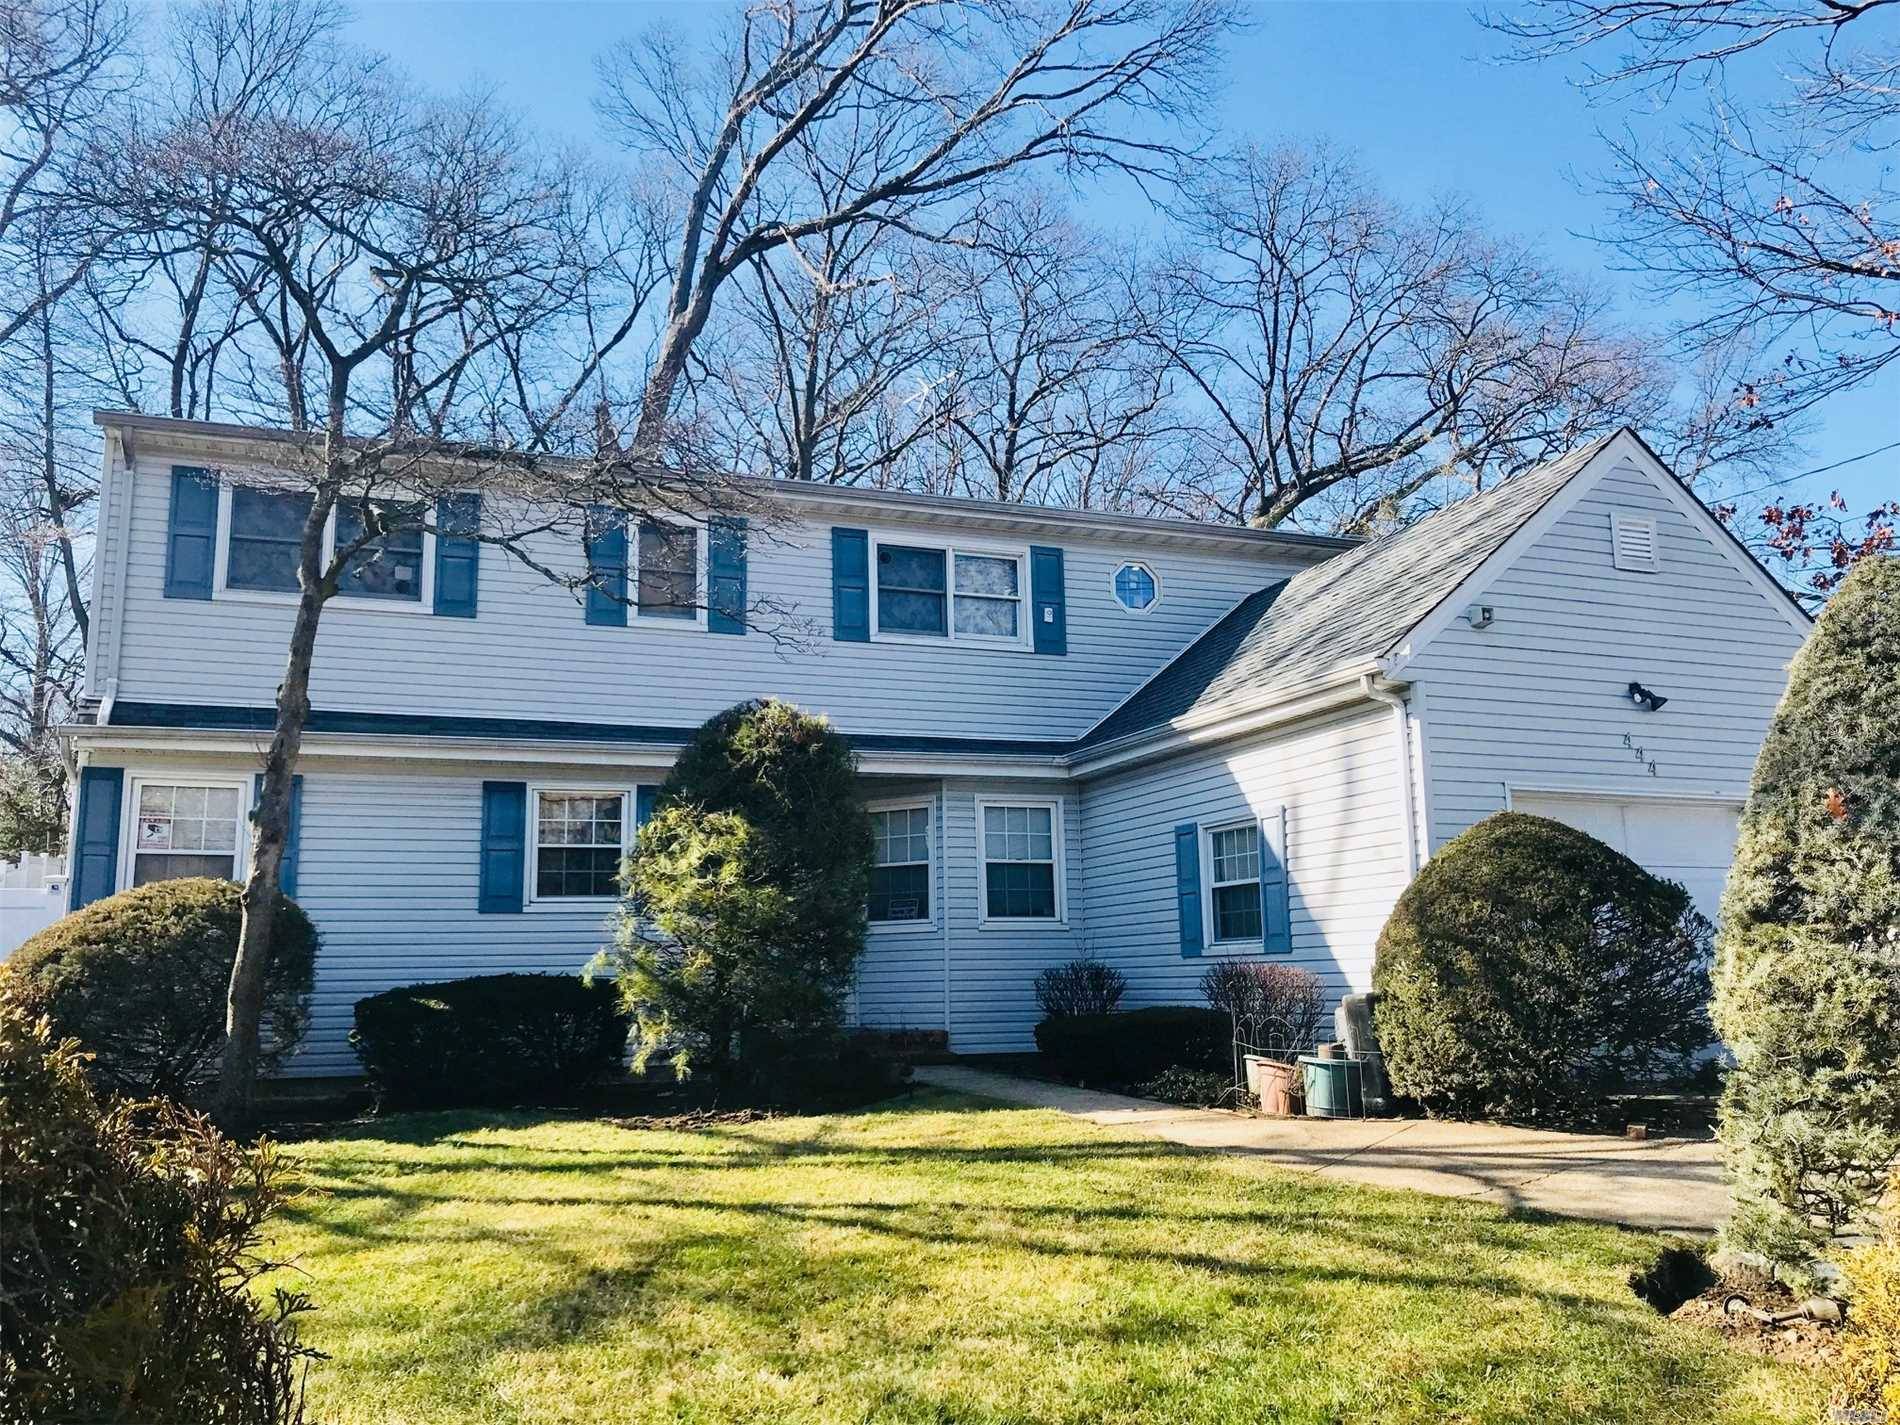 Magnificent 6 Bedrooms 4 Full Baths Updated Sun-Drenched Home For Sale In West Hempstead.